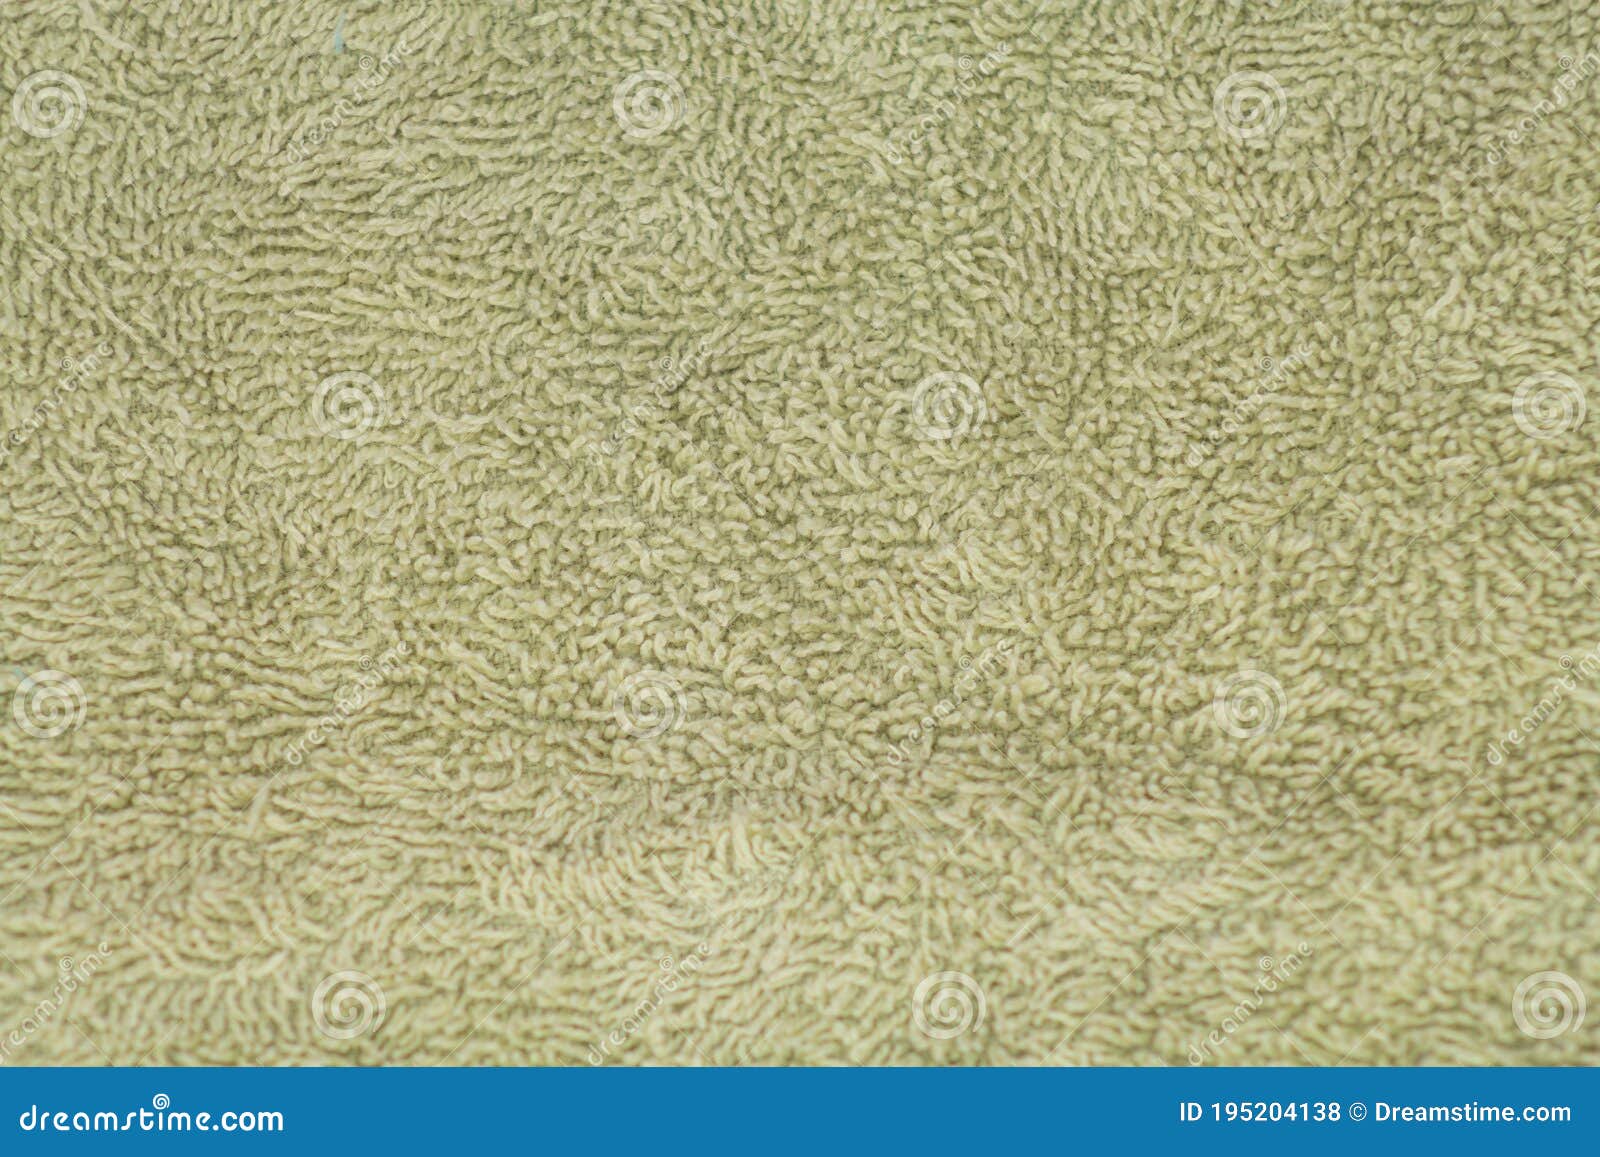 towel texture in light olive green color